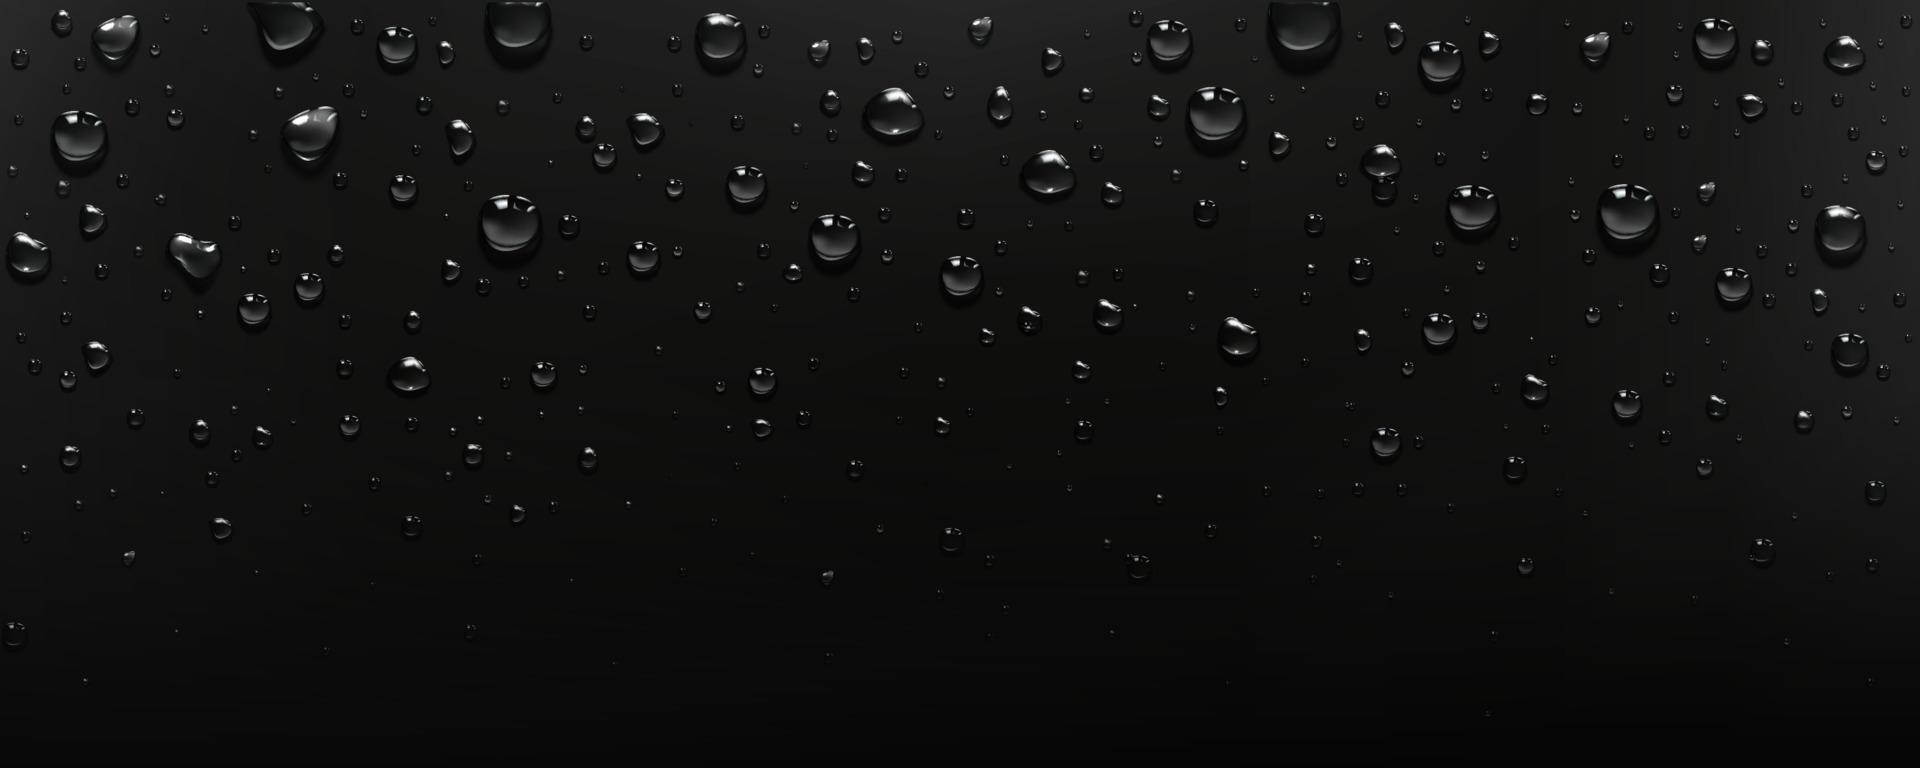 Pure clear water drops on black background vector